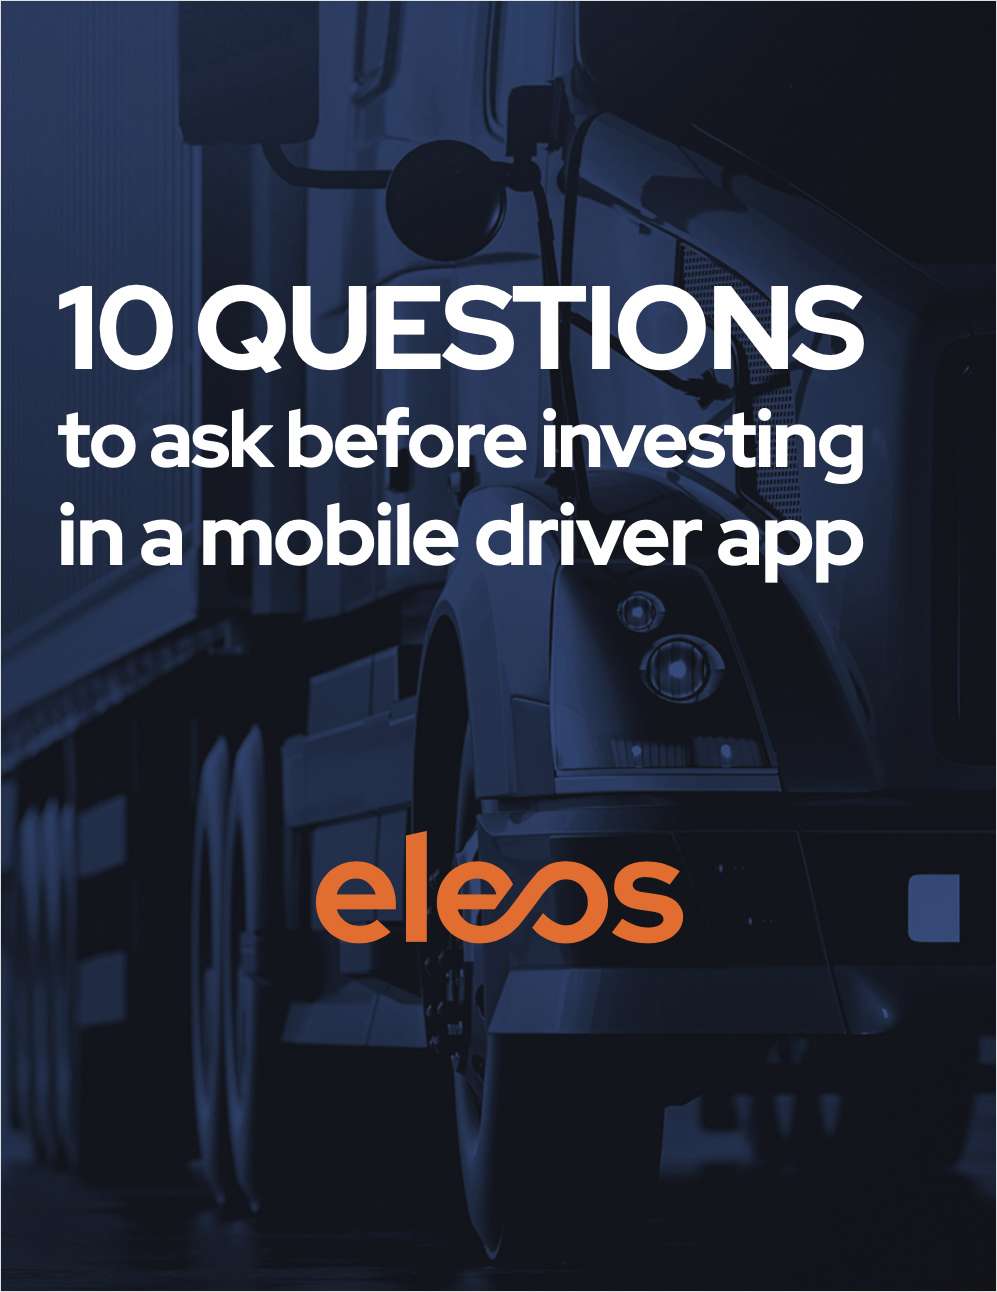 10 critical questions to ask before investing in a mobile driver app